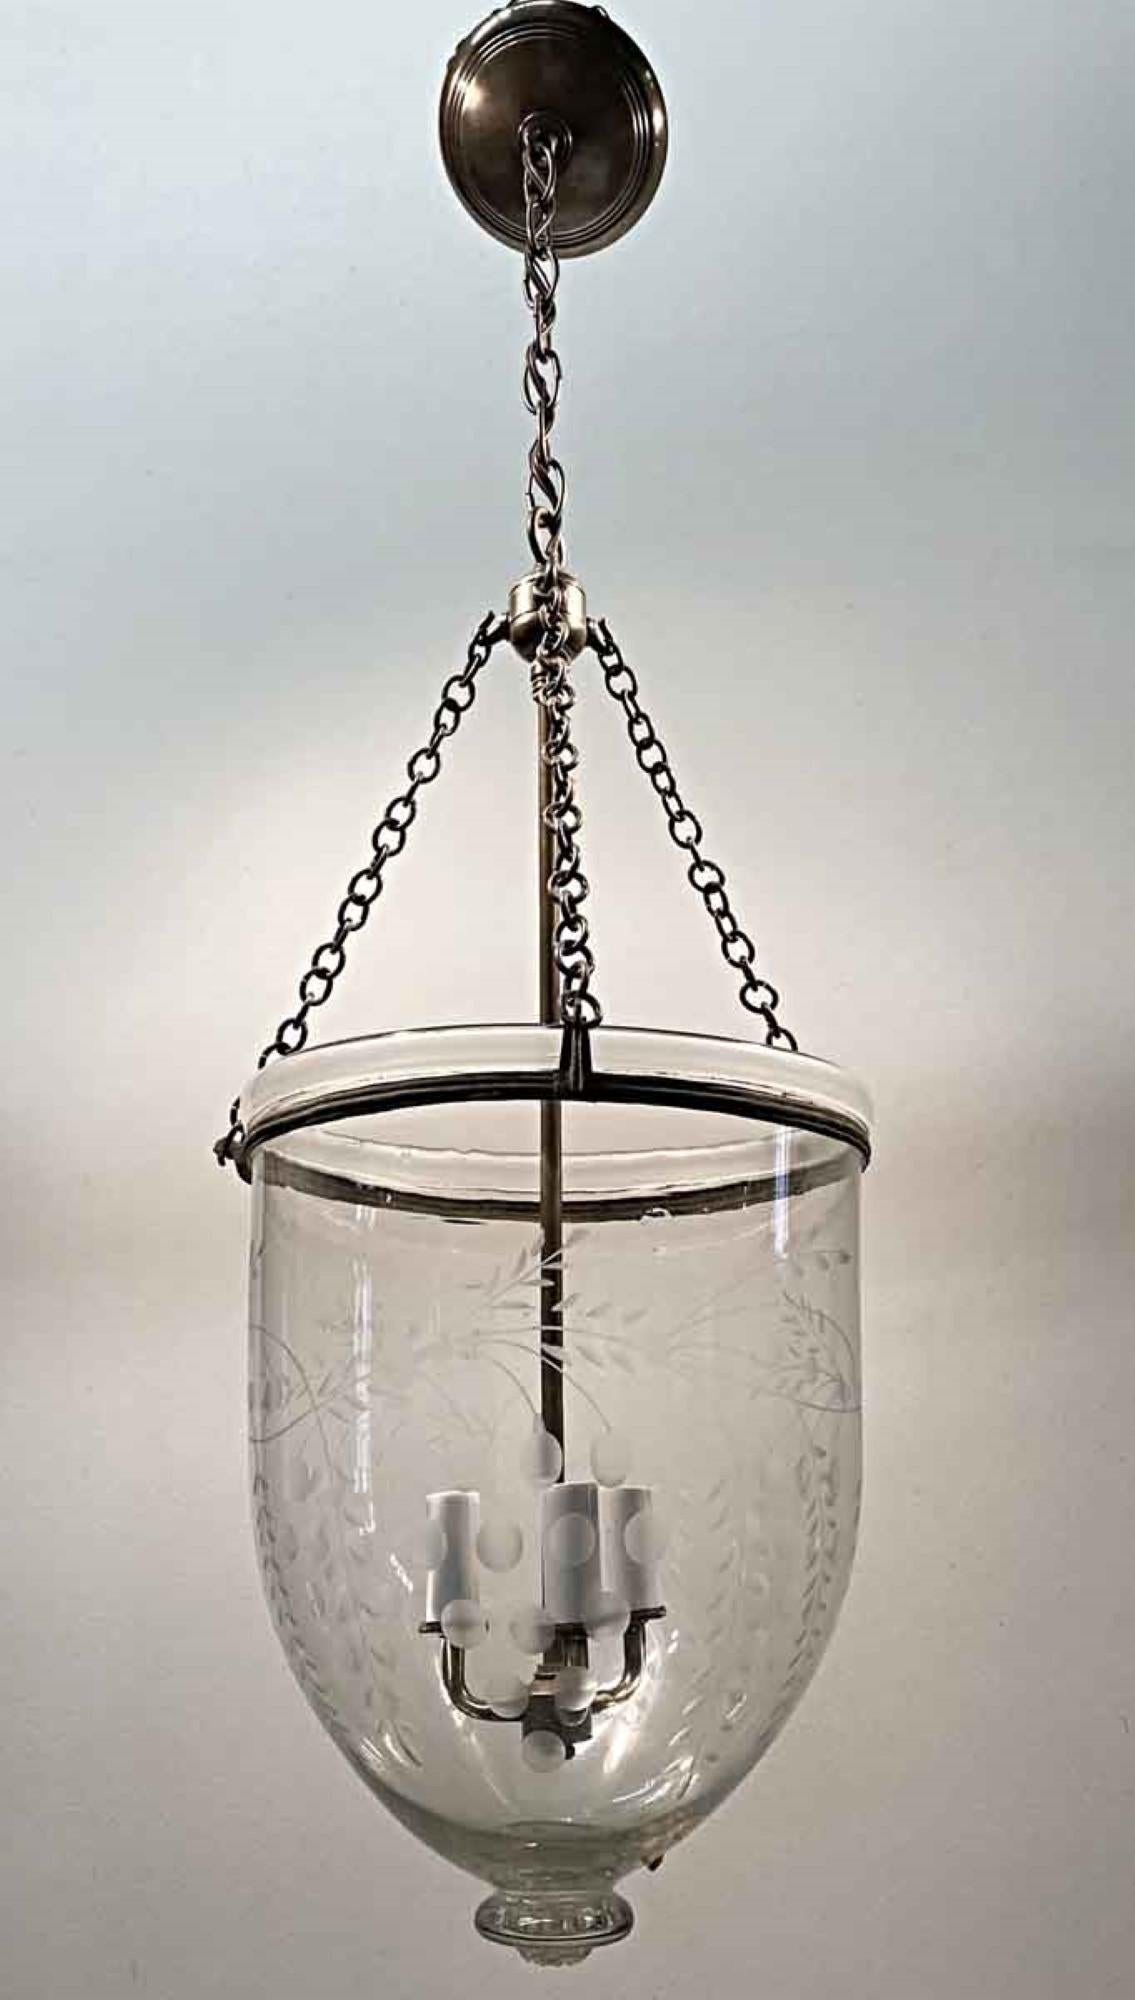 19th century English bell jar pendant lantern. It is a hand blown clear glass bell jar shade with etched vines, leaves and berries, plus a glass finial. The rolled ring around the neck is original to the piece. In the 1800s this bell jar held a